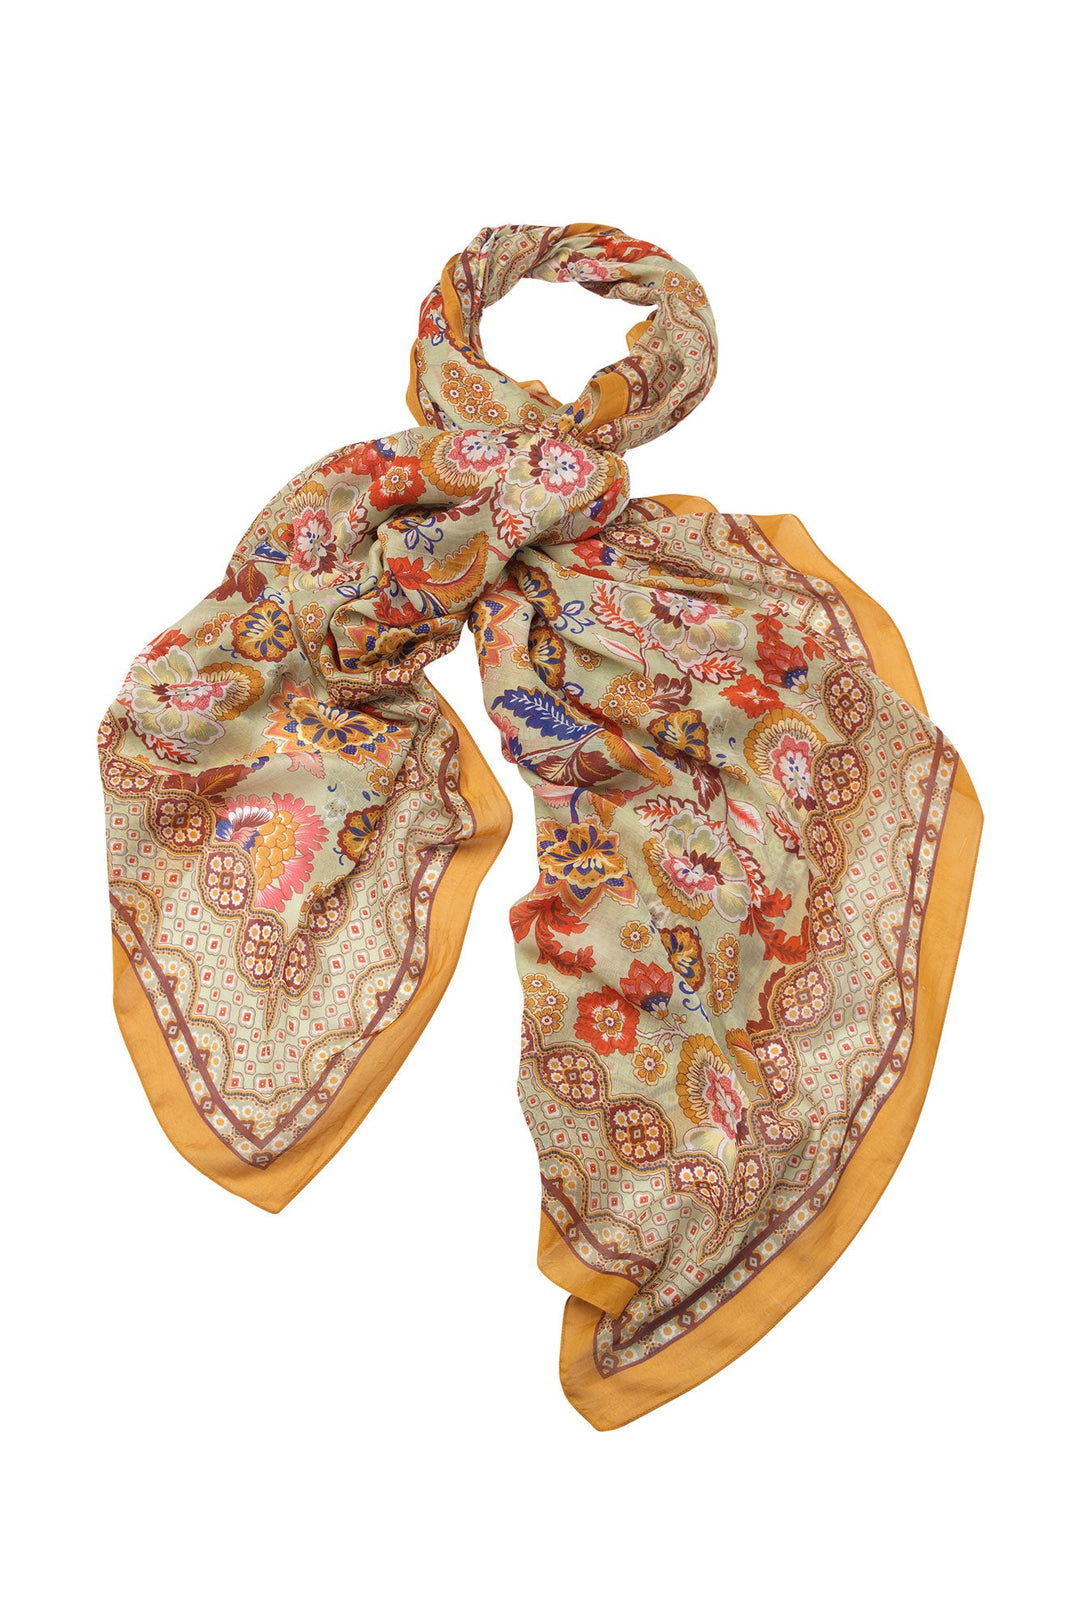 Women's accessories, gifts for her. Large scarf  in taupe with Indian flower floral print by One Hundred Stars 